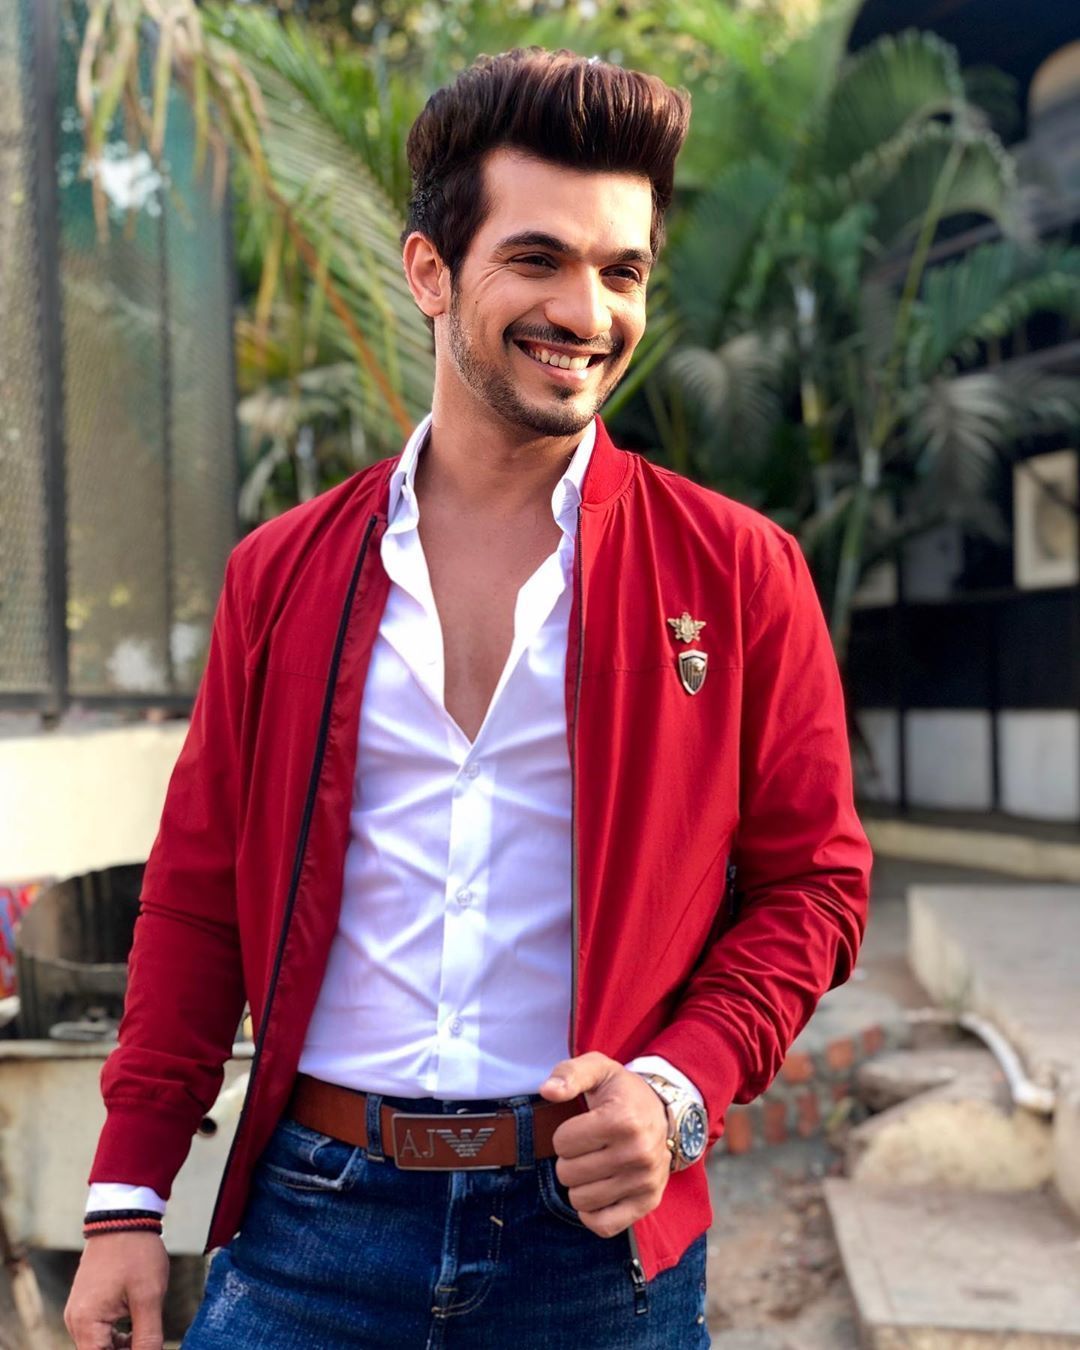 Arjun Bijlani responds to rumours of being a part of Bigg Boss 15, says 'you really can’t comment on what you end up deciding'